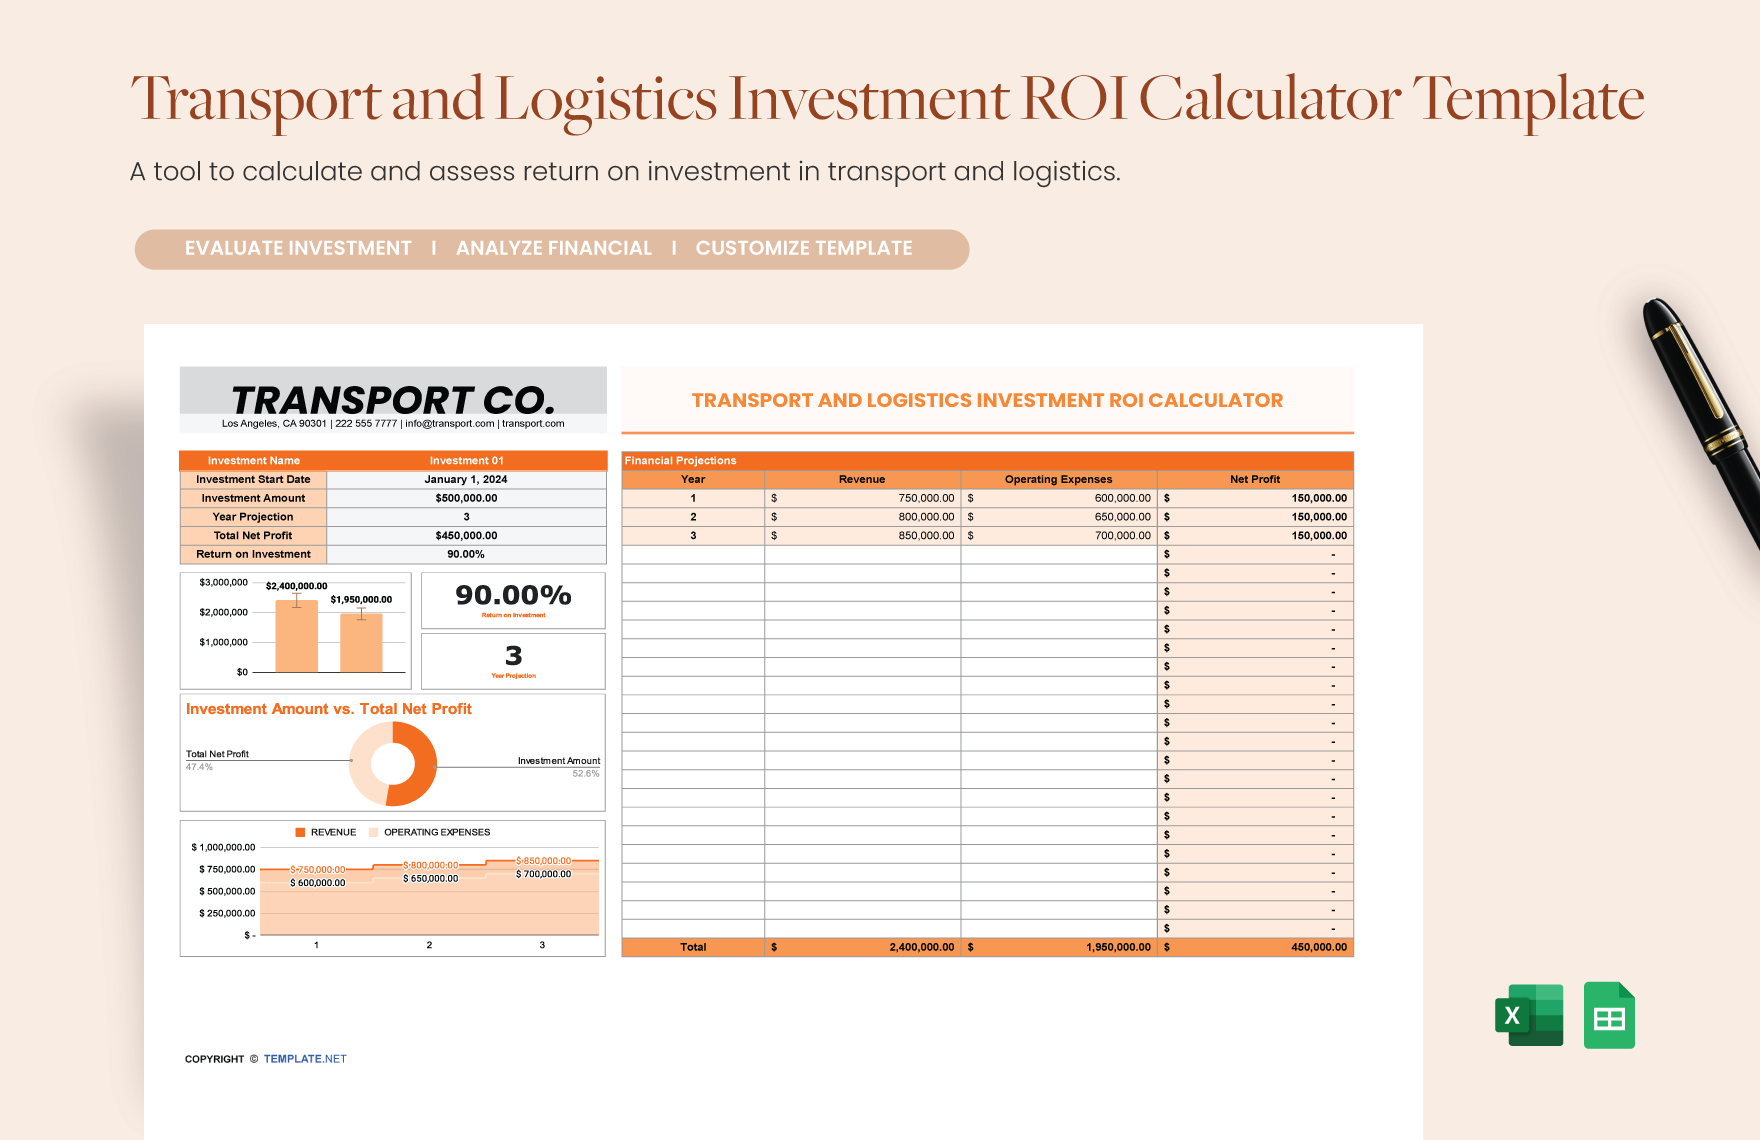 Transport and Logistics Investment ROI Calculator Template